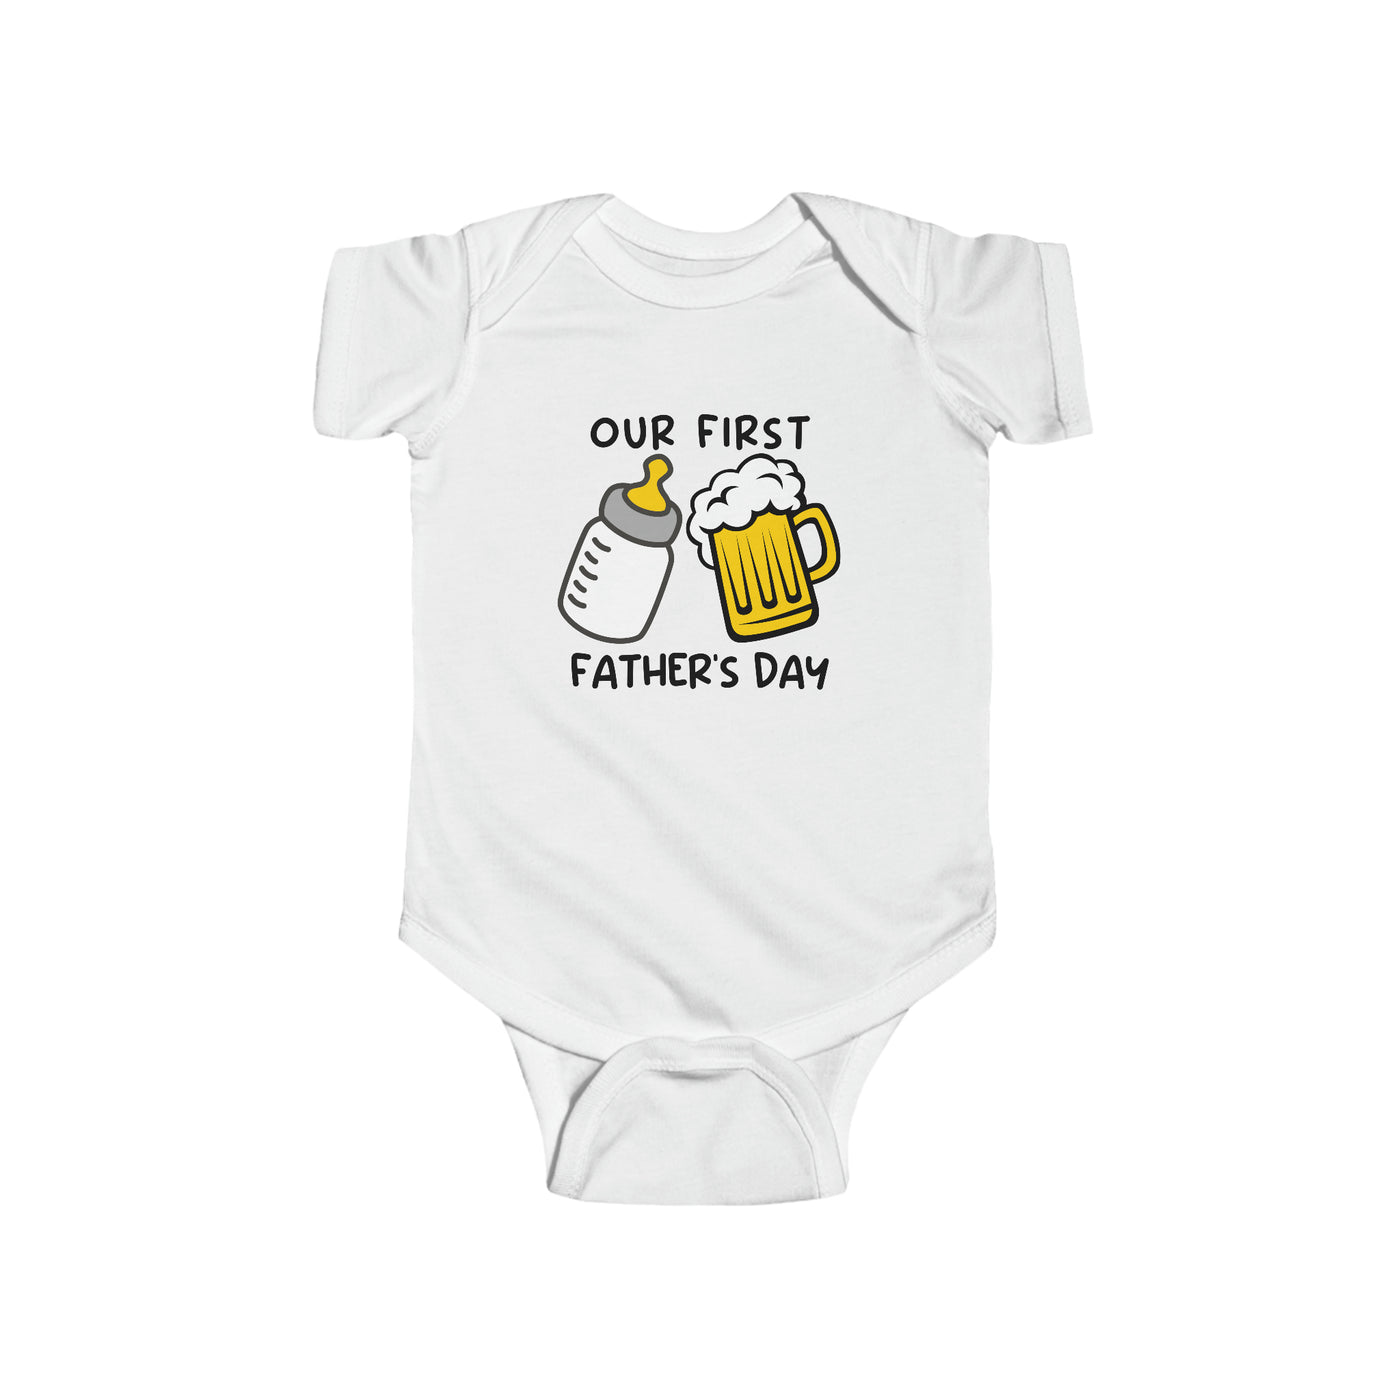 Our First Father's Day Onesie